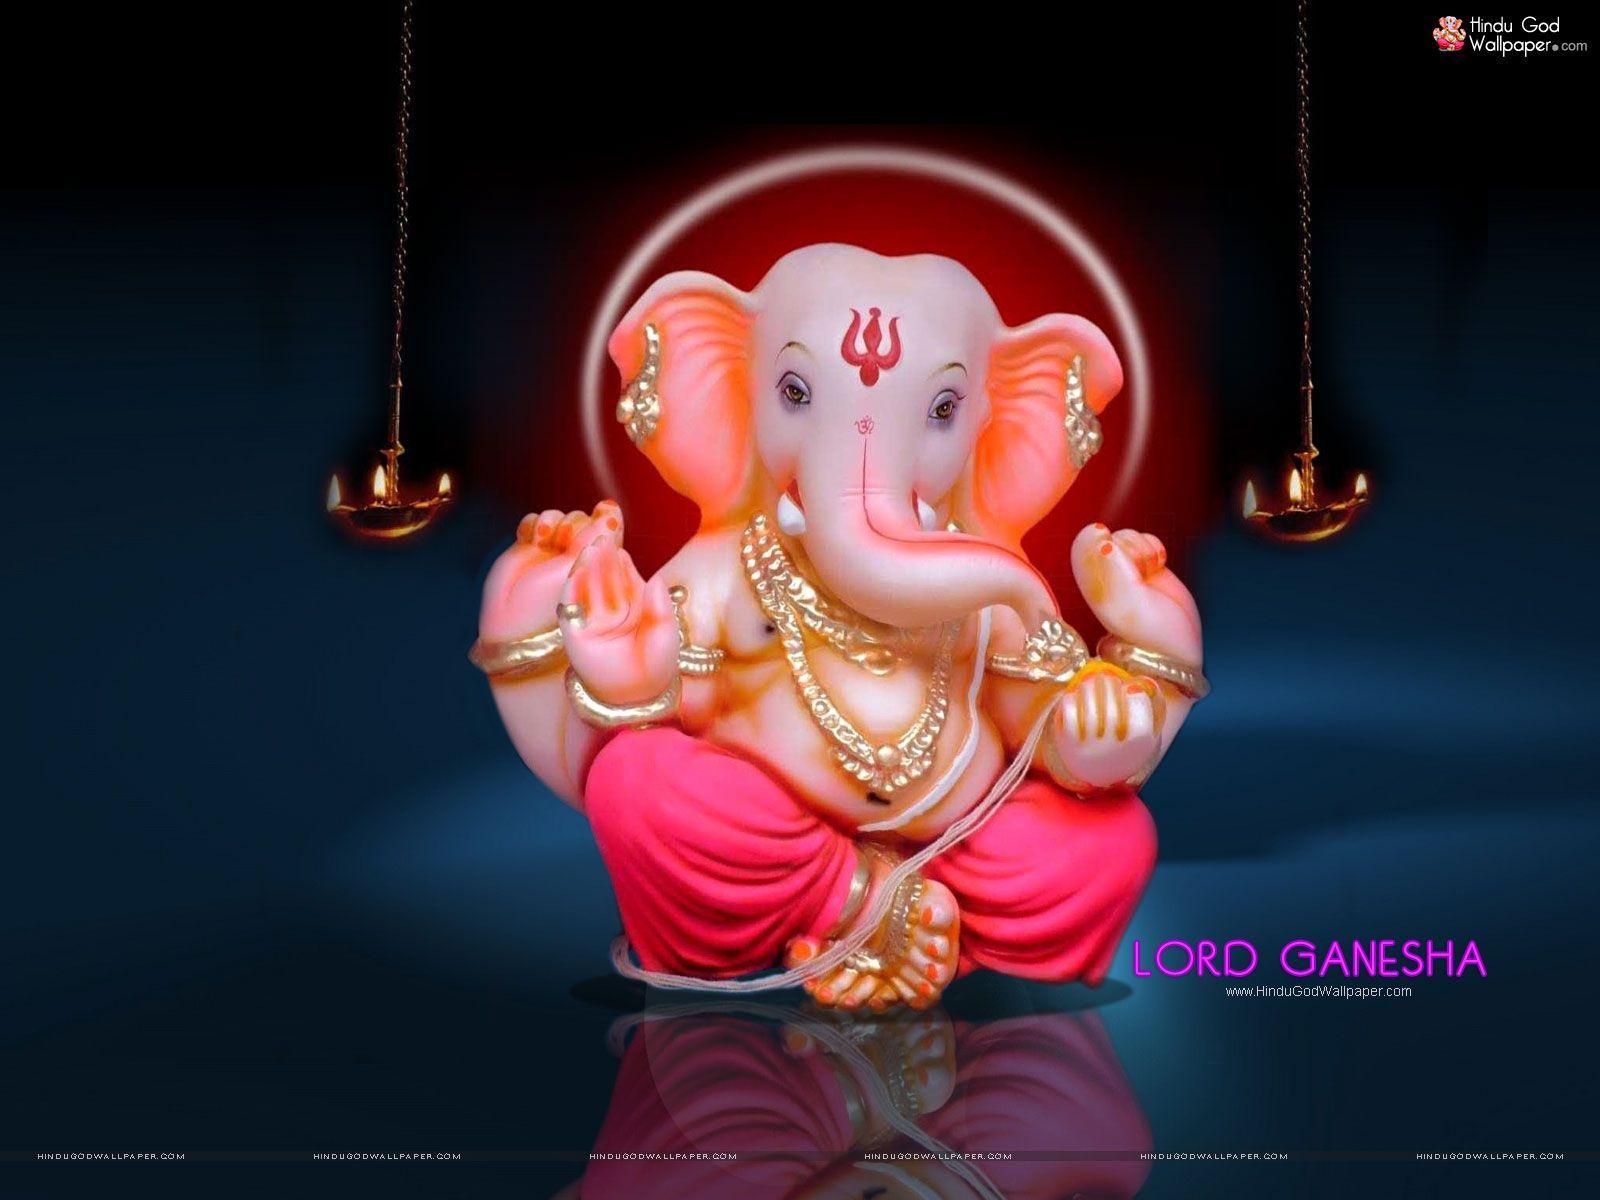 Pin on Ganesh images